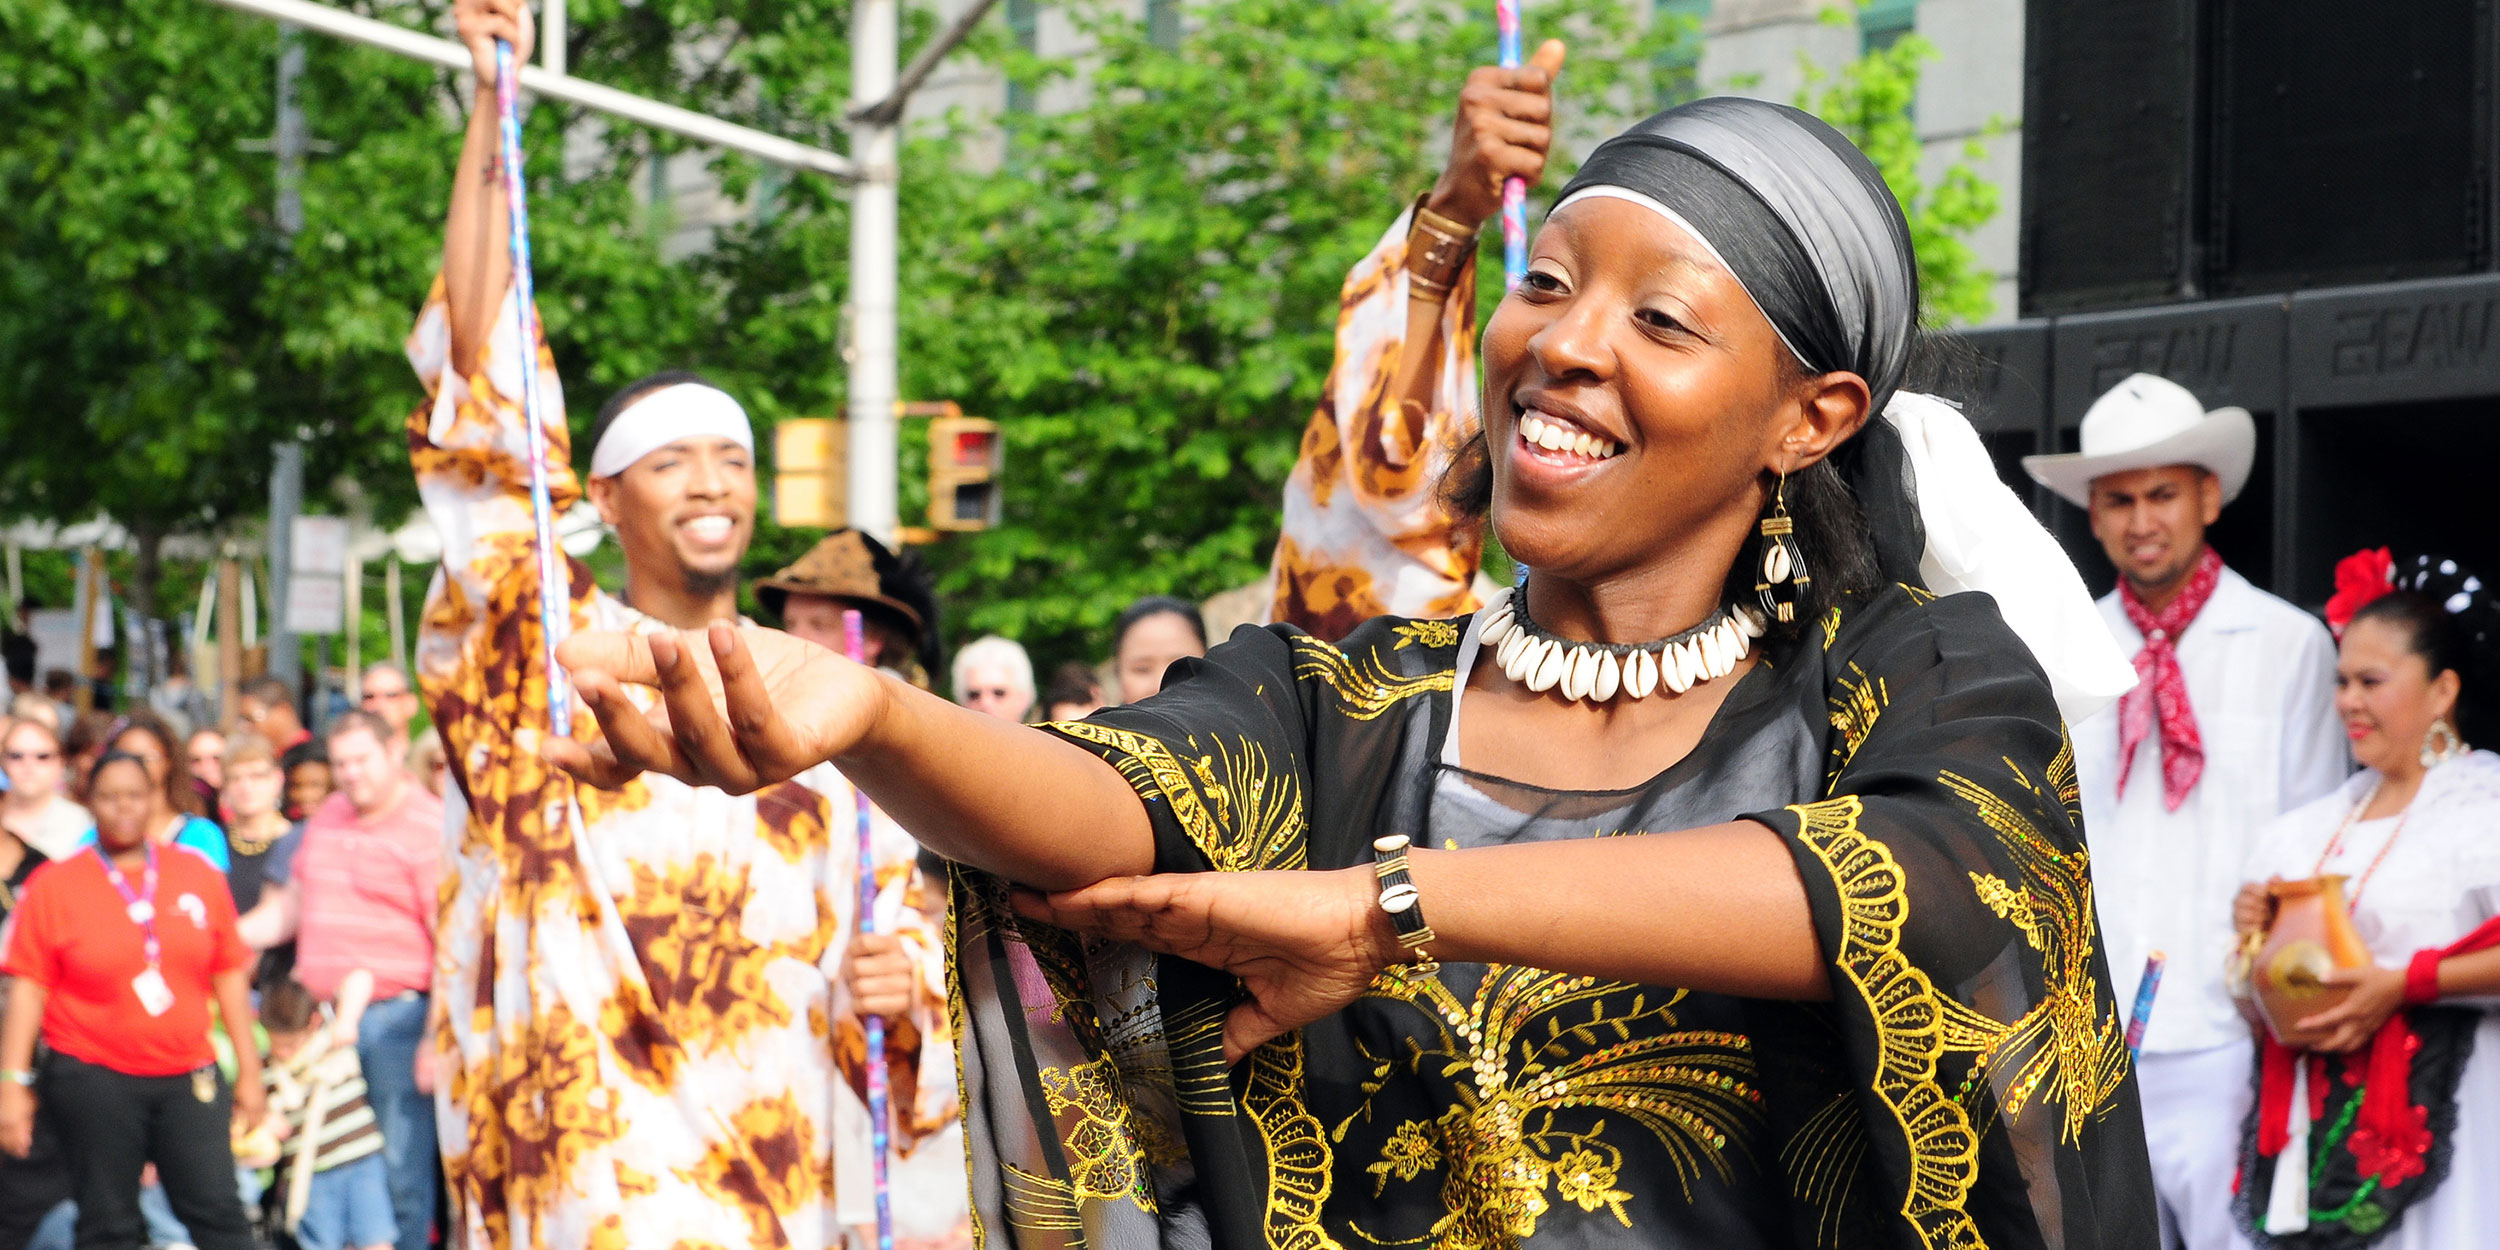 A woman smiles brightly as she dances in traditional African clothing at a festival in Wake County